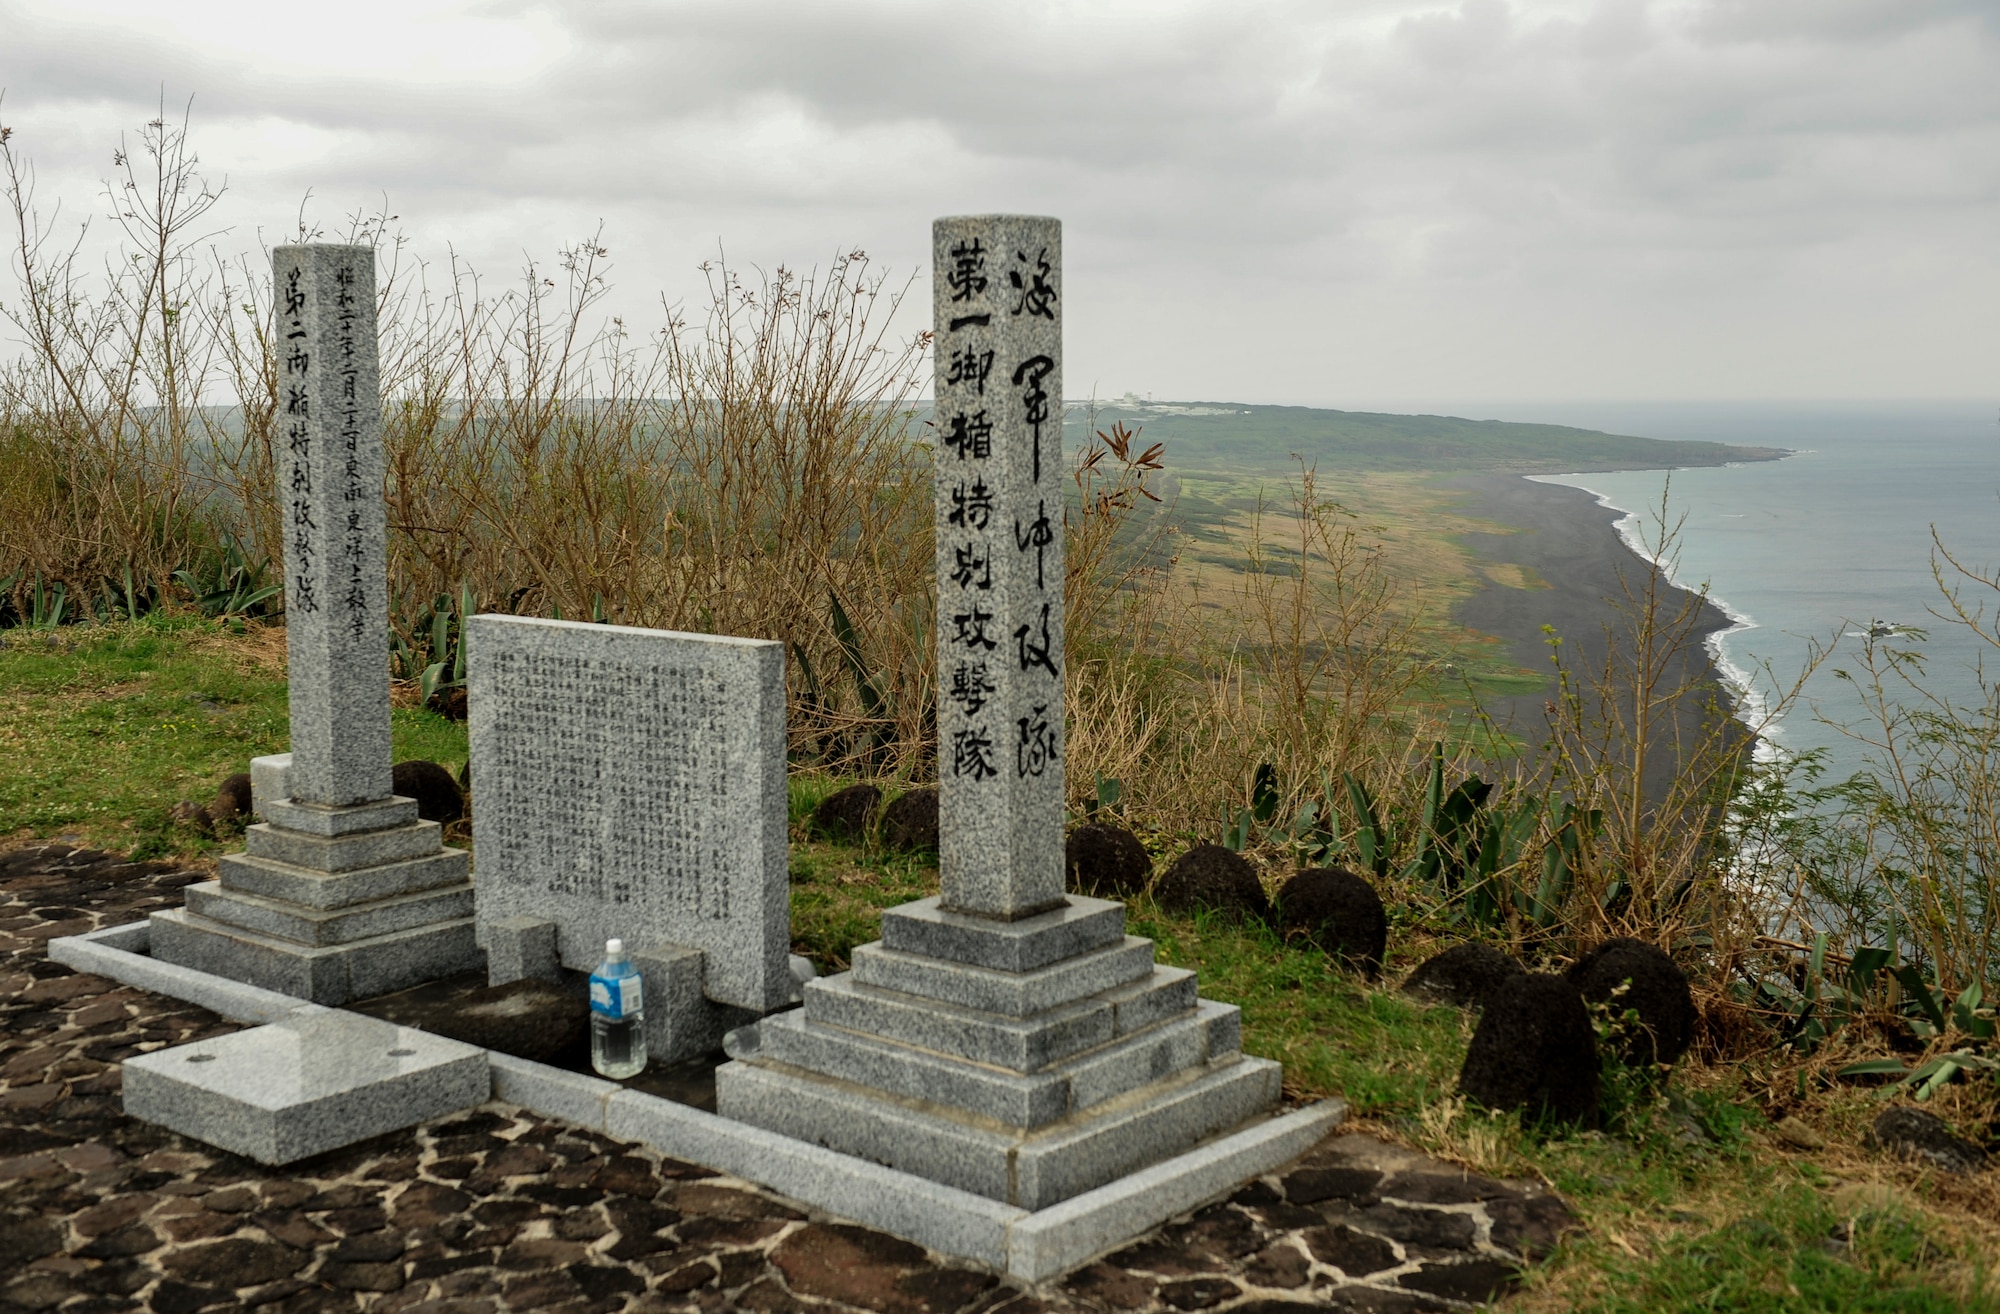 A memorial dedicated to fallen U.S. and Japanese military during the battle of Iwo Jima rests on top of Mount Suribachi on Iwo To, Japan Jan. 8, 2015. Approximatley 25,000 American and Japanese troops died during the 36-day battle. Other memorials and reminders of the war can be found throughout the island. (U.S. Air Force photo by Airman 1st Class John Linzmeier)